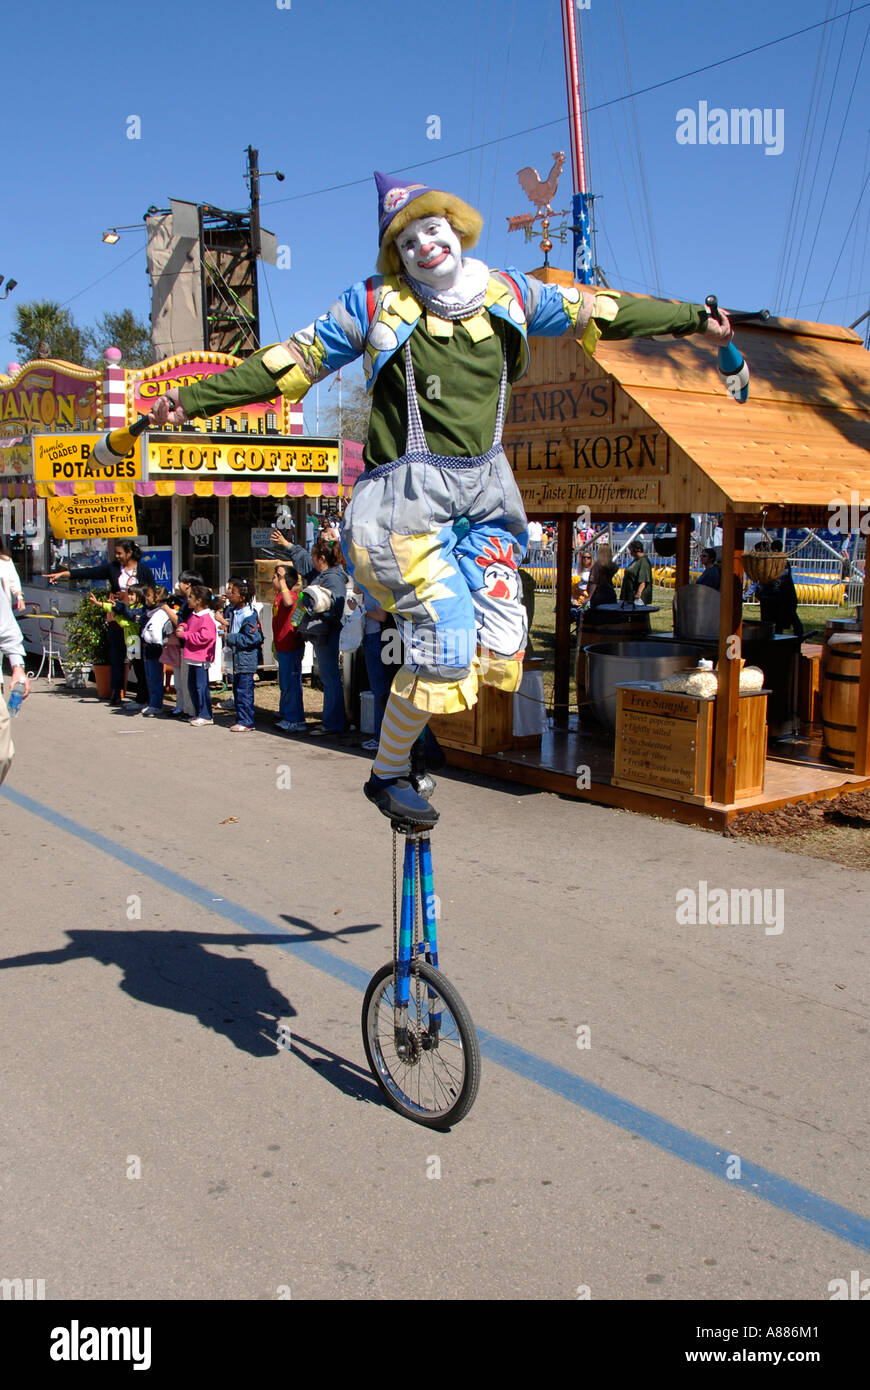 Clown riding on a unicycle participates in a parade at the Florida State Fair in Tampa Florida FL Stock Photo